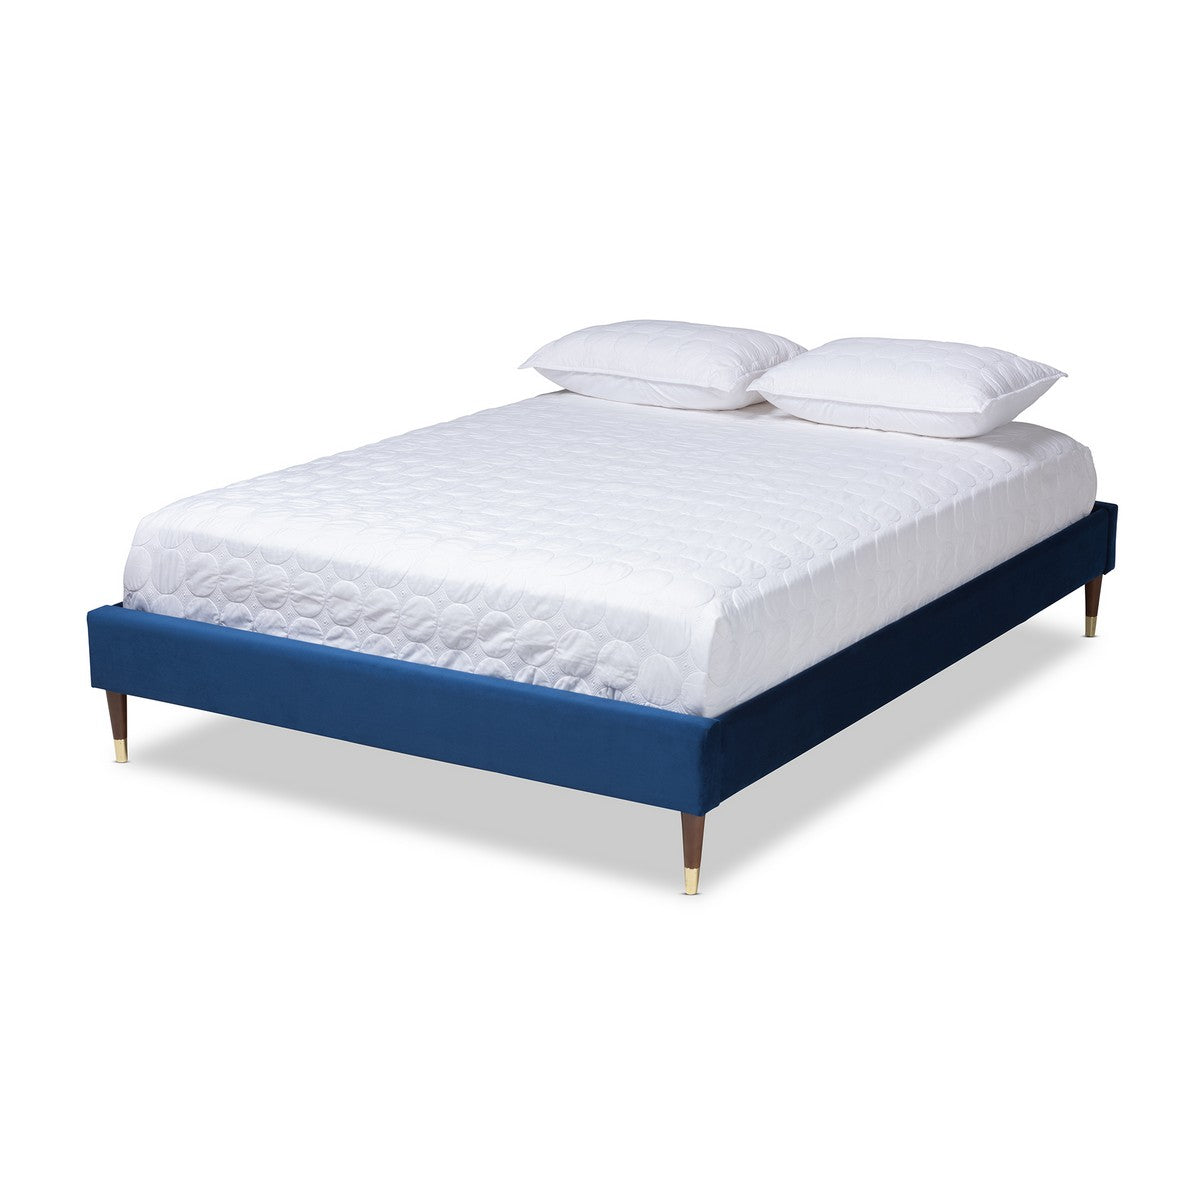 Baxton Studio Volden Glam and Luxe Navy Blue Velvet Fabric Upholstered Queen Size Wood Platform Bed Frame with Gold-Tone Leg Tips Baxton Studio-Bed Frames-Minimal And Modern - 1